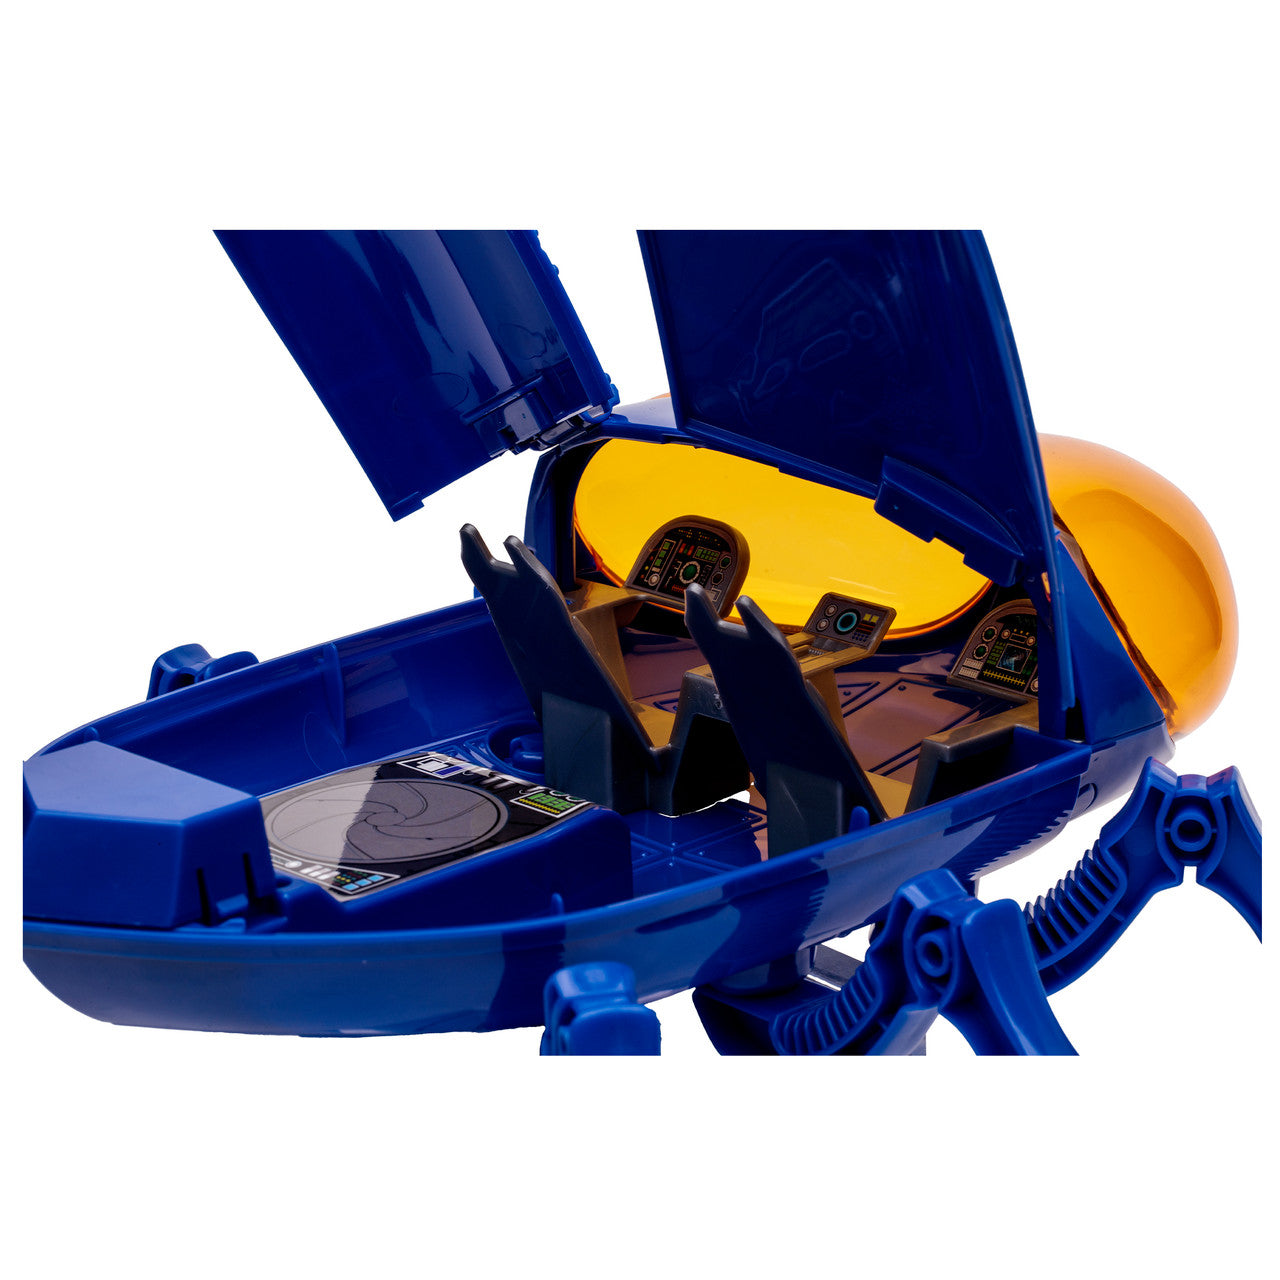 DC Super Powers Wave 3 - The Bug: Blue Beetle's Aerial Mobile Headquarters Vehicle